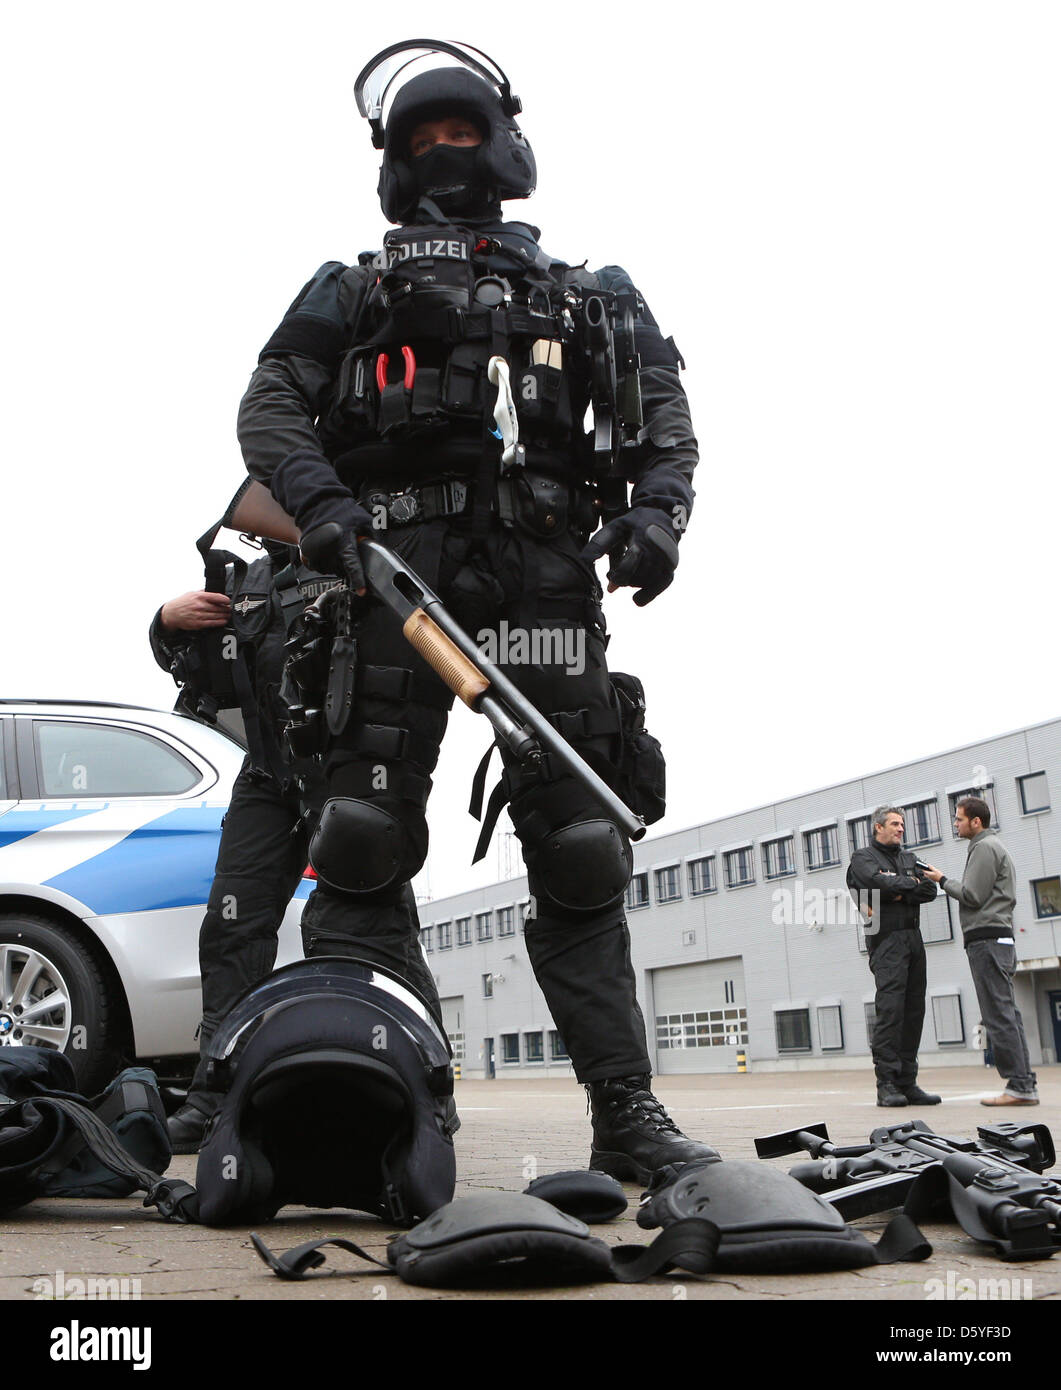 A police officer of the Mobile special response unit (Mobiles Einsatzkommando/MEK) shows his equipment during a press presentation at the State Police School in Hamburg, Germany, 23 October 2012. On 06 November 2012, the Mobile special response unit Hamburg will celebrate its 40th anniversary. Photo: CHRISTIAN CHARISIUS Stock Photo